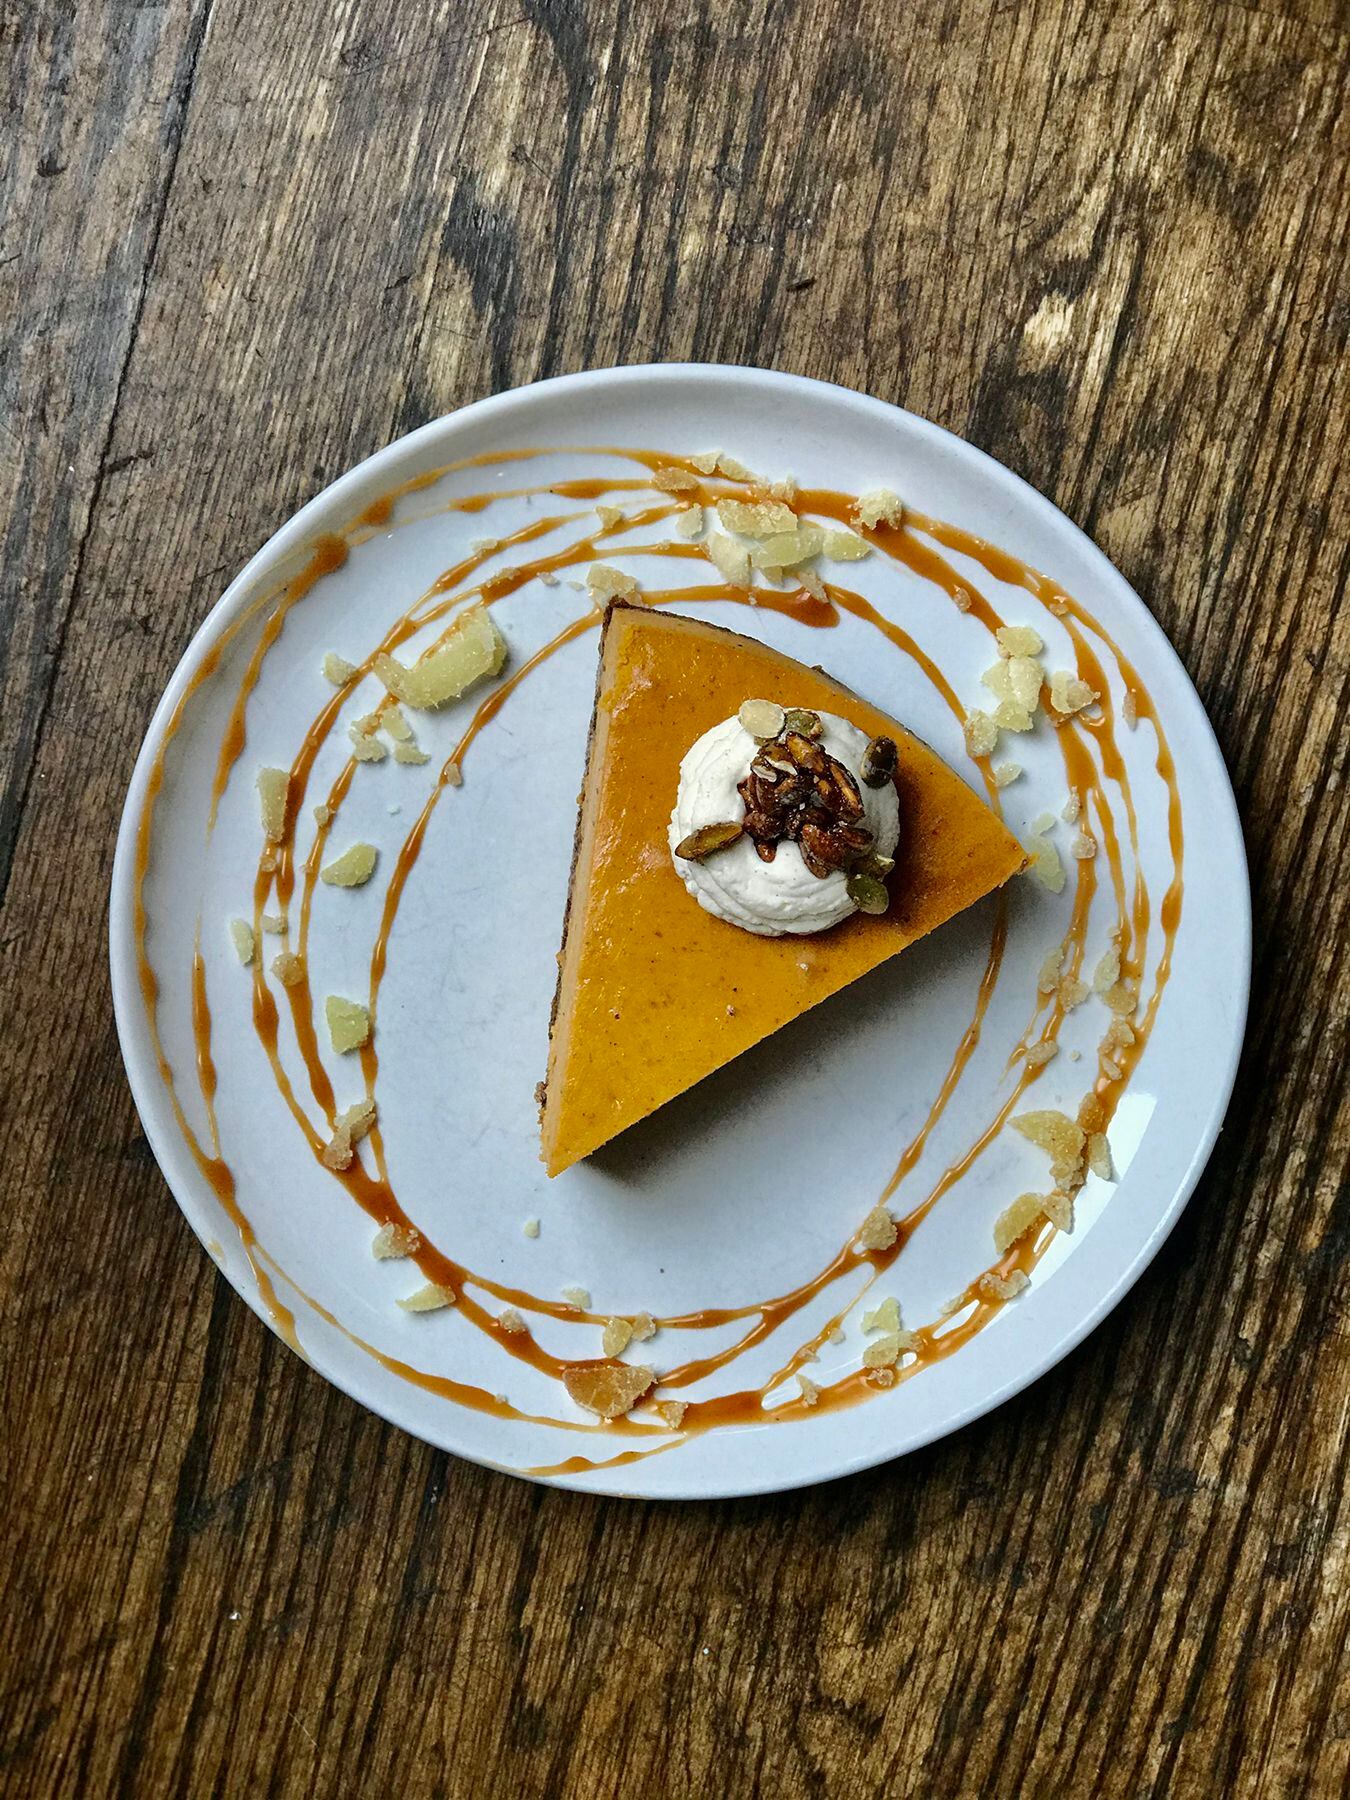 Davio's in The Colony will serve a pumpkin pie with whipped crème fraiche on Thanksgiving.